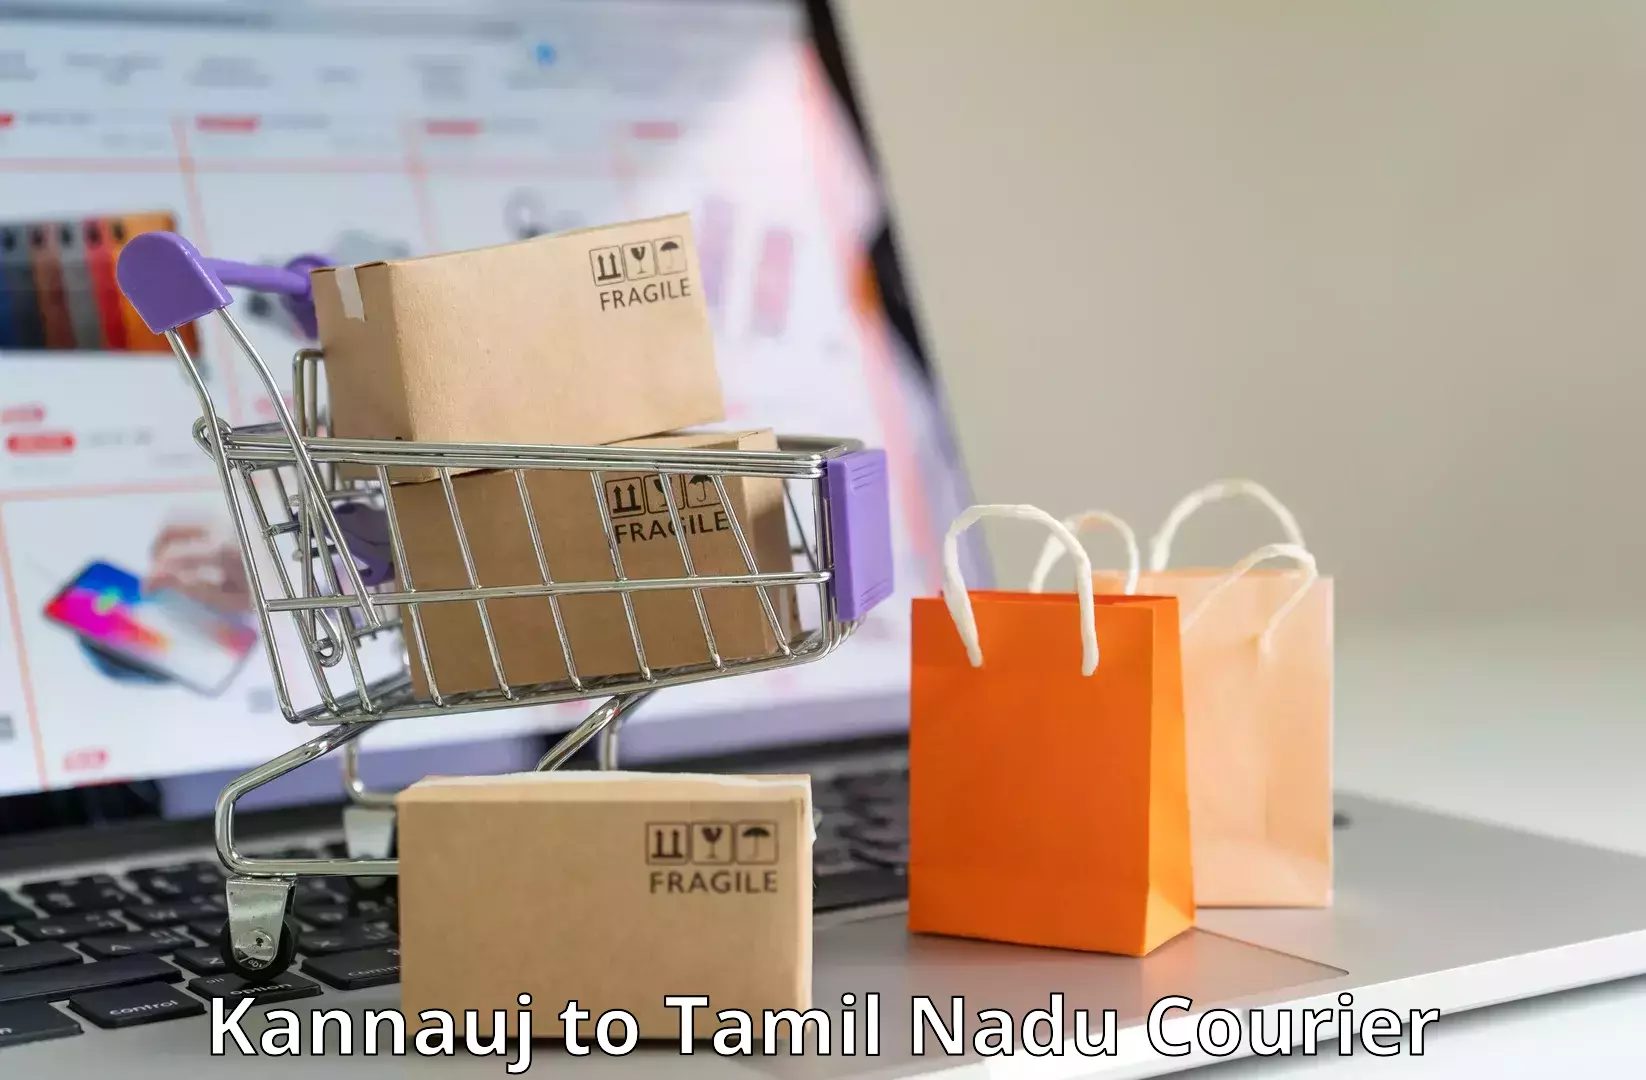 Expedited parcel delivery in Kannauj to Tamil Nadu